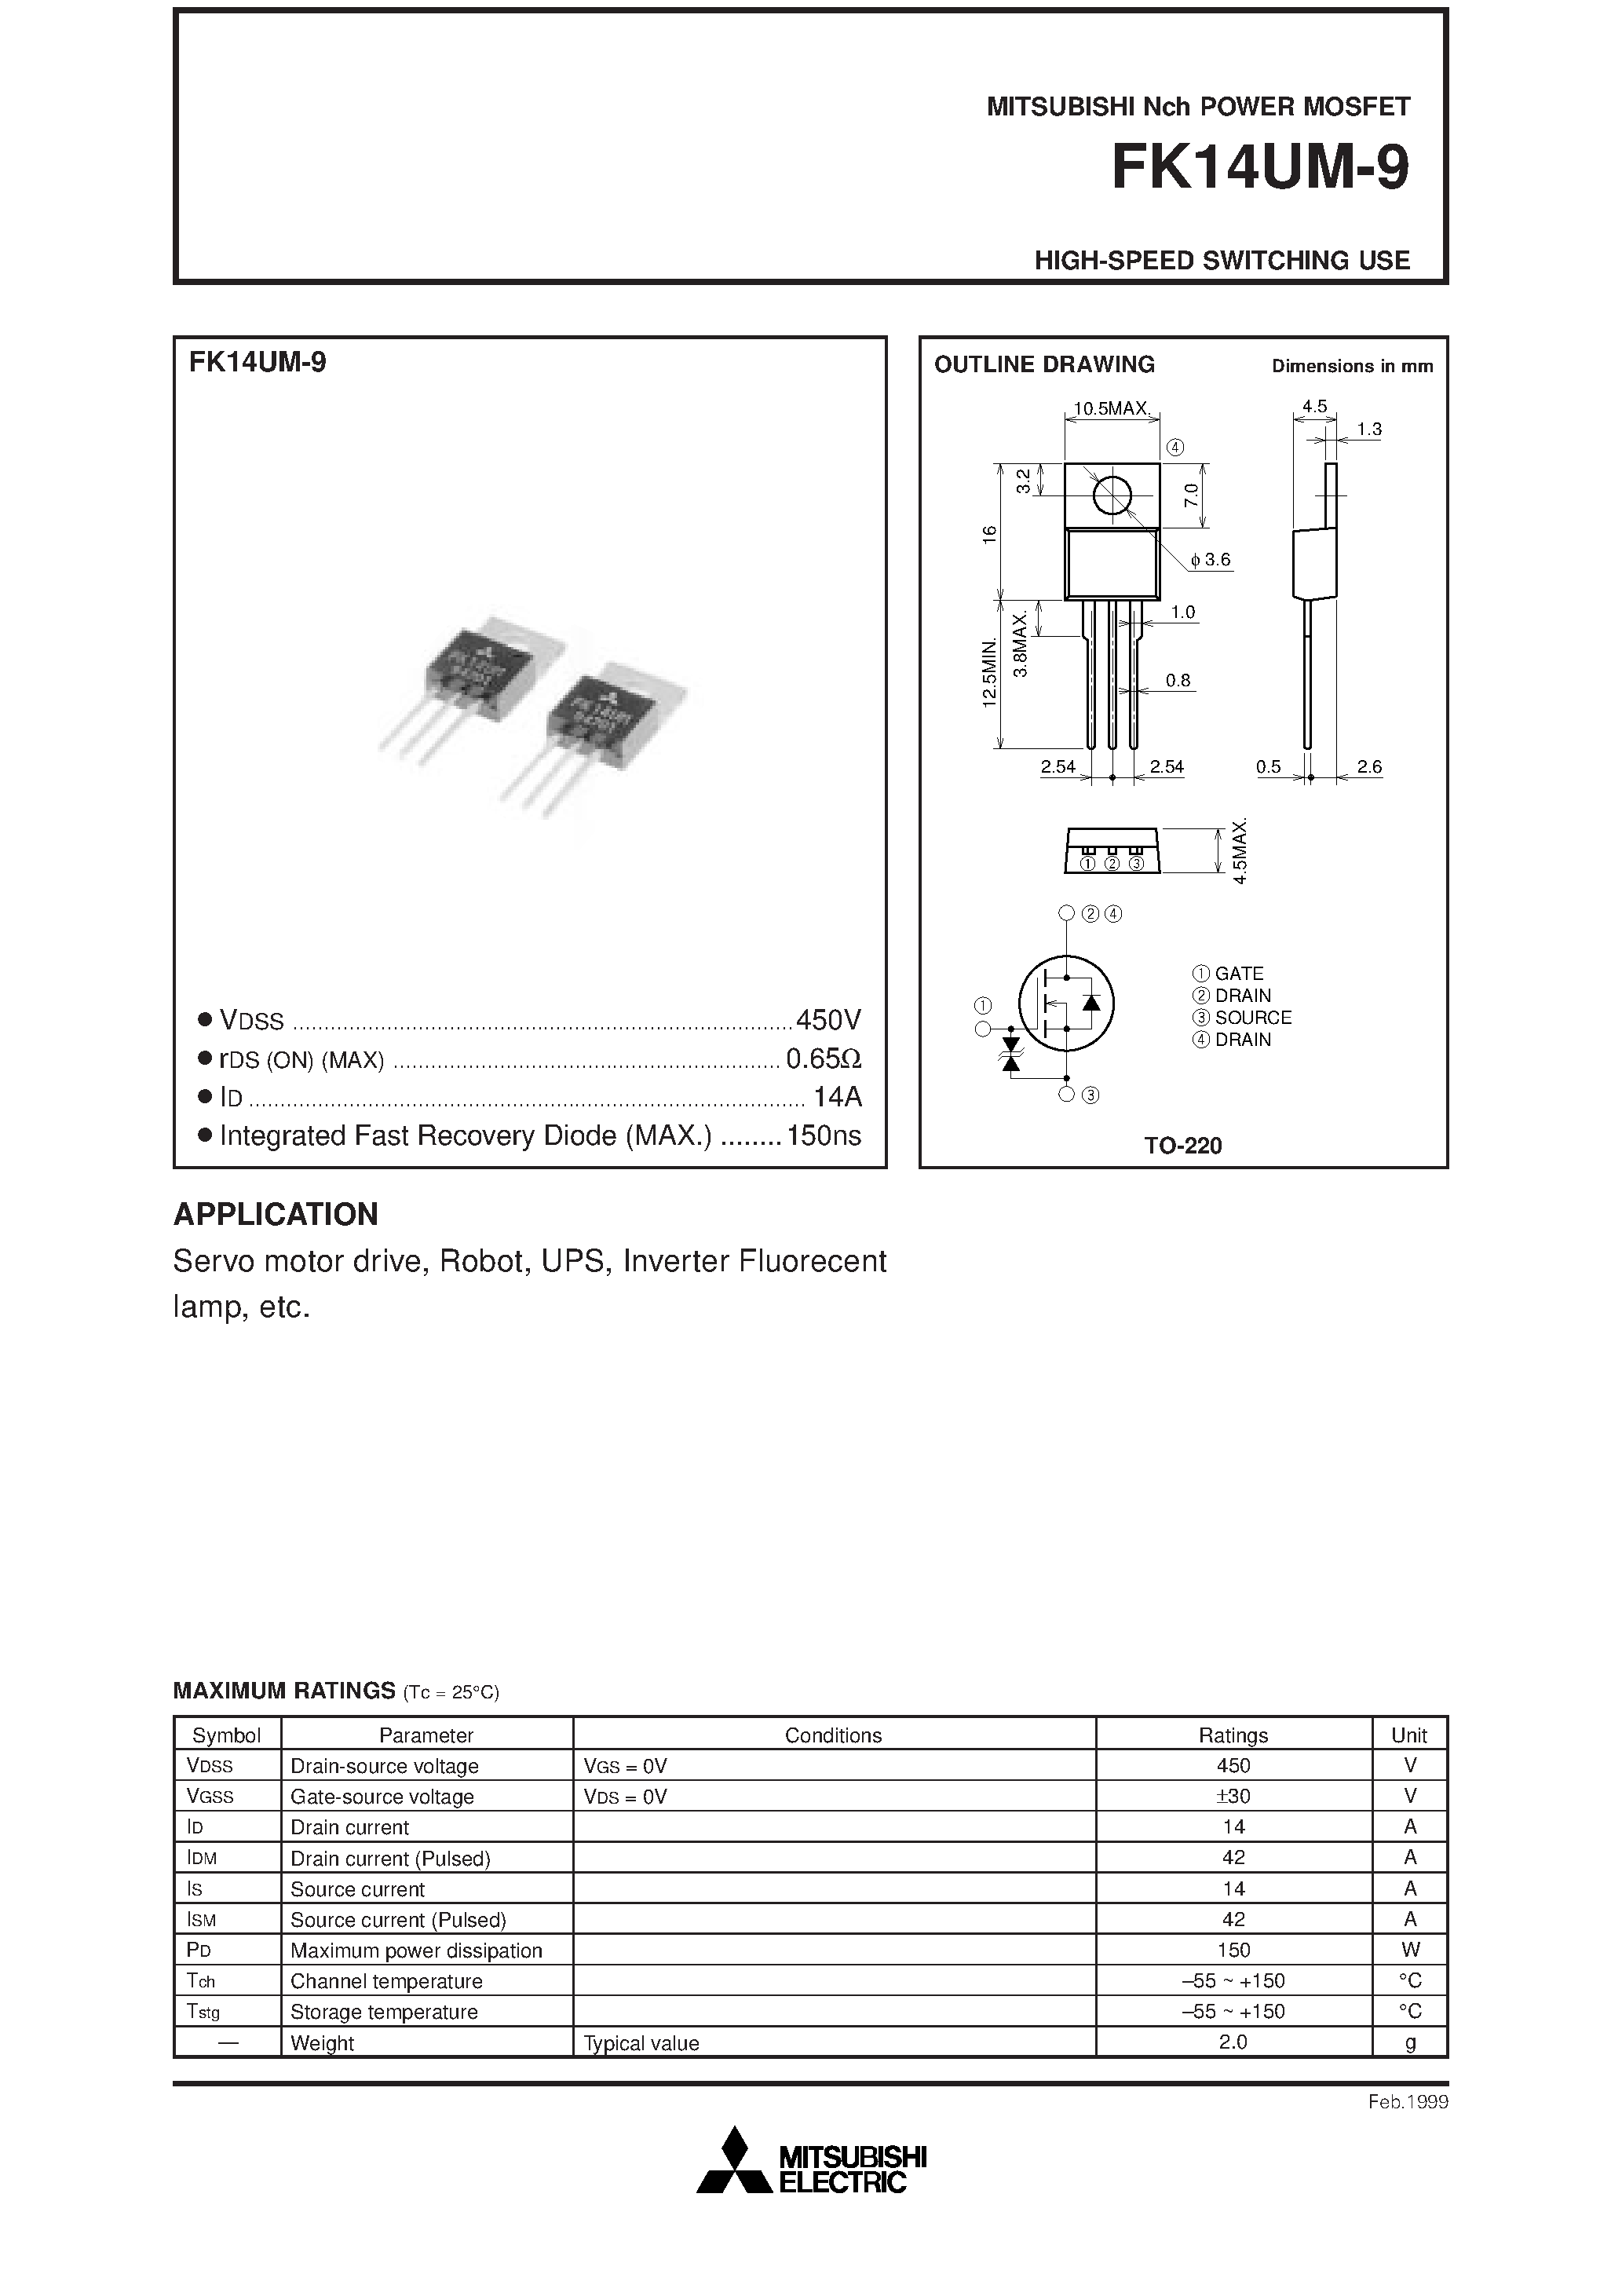 Datasheet FK14UM-9 - Nch POWER MOSFET HIGH-SPEED SWITCHING USE page 1